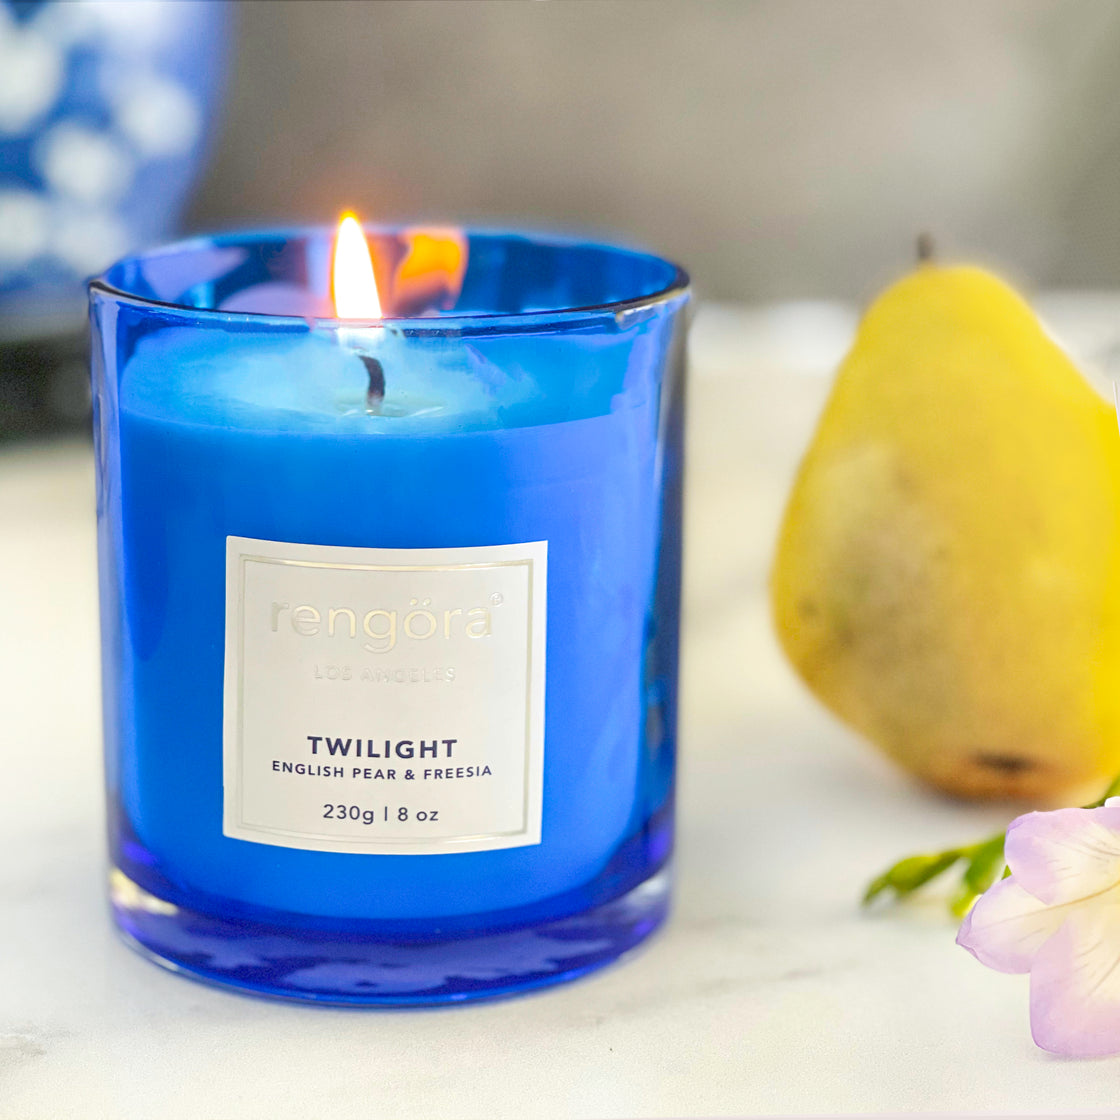 The rengöra twilight scented home candle is captured in the moment of being lit, with the fragrant notes of English pear and freesia, complemented by a zesty lime fruit and a delicate flower, all set against a softly blurred background.